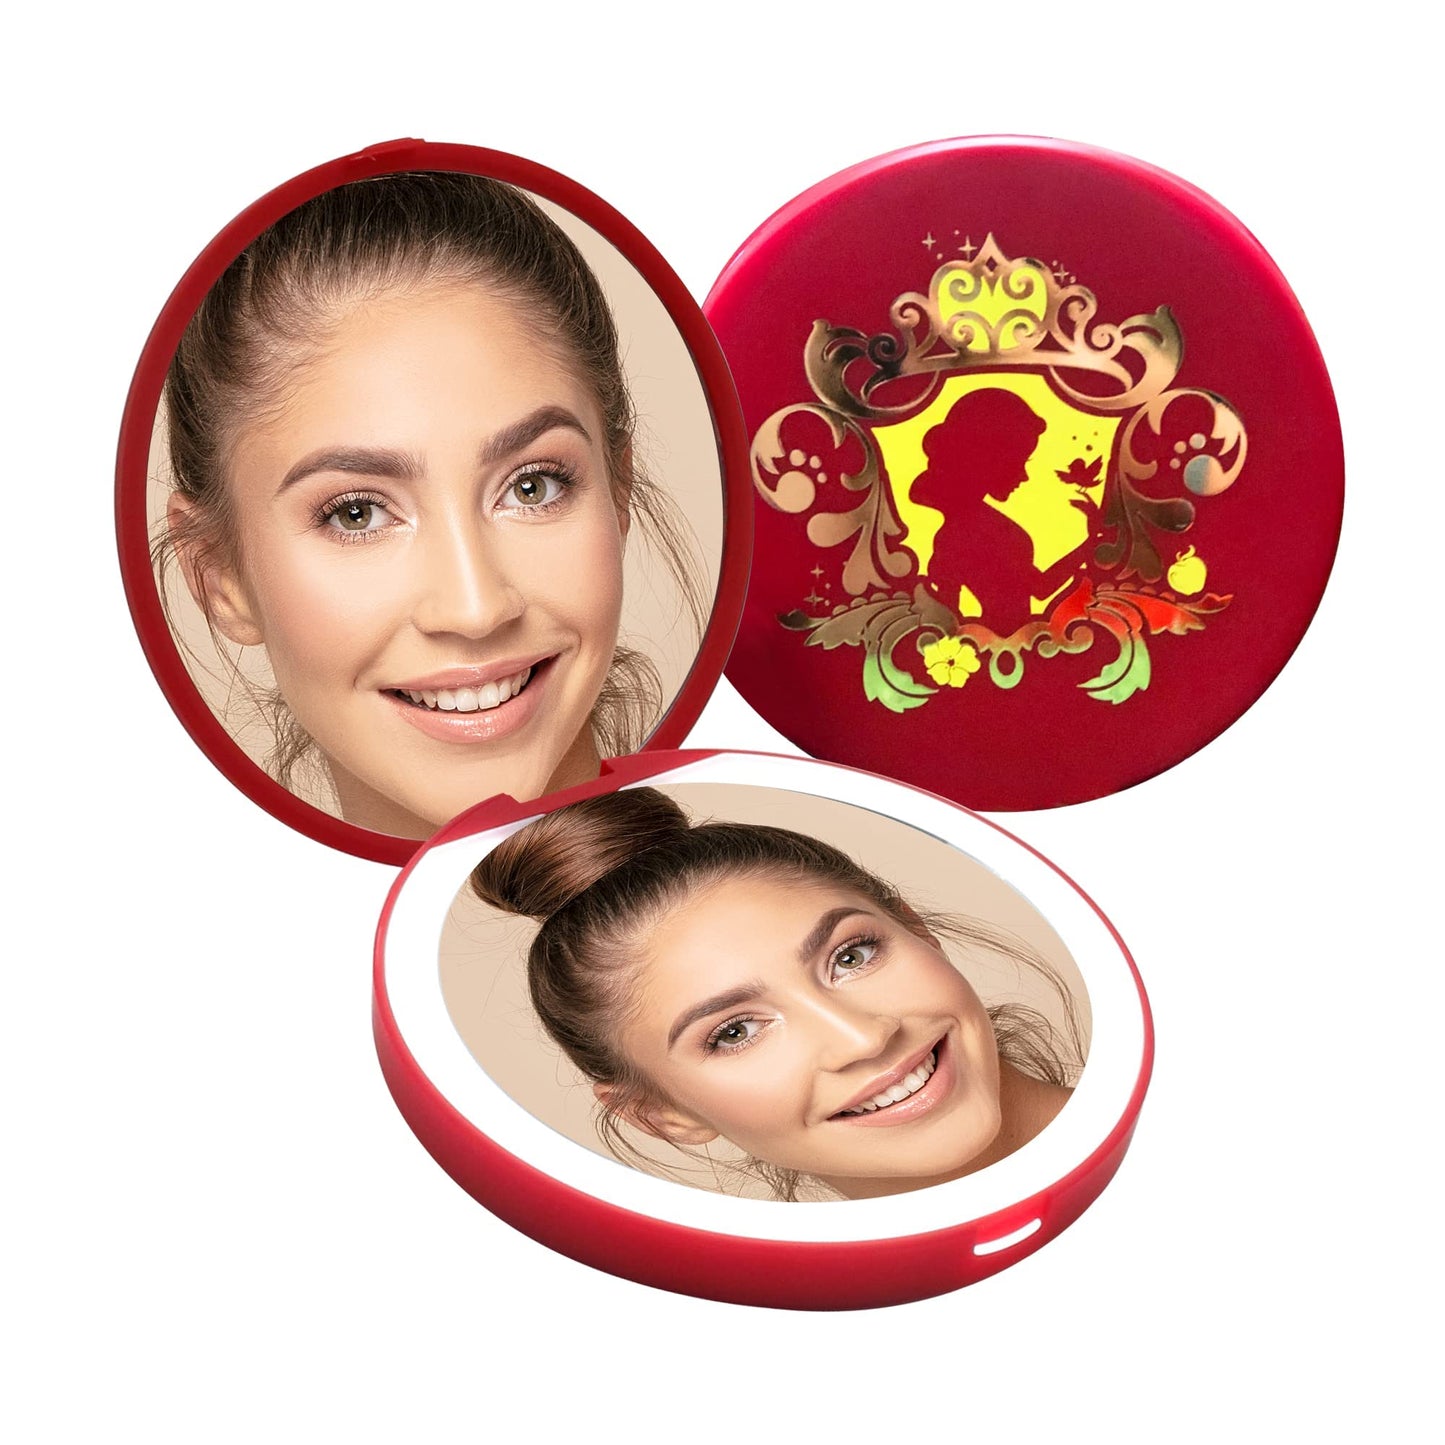 Impressions Vanity Disney Princess Snow White Compact Mirror with LED Light, Round Lighted Vanity Makeup Mirror with USB and Folding Magnify Top Glass